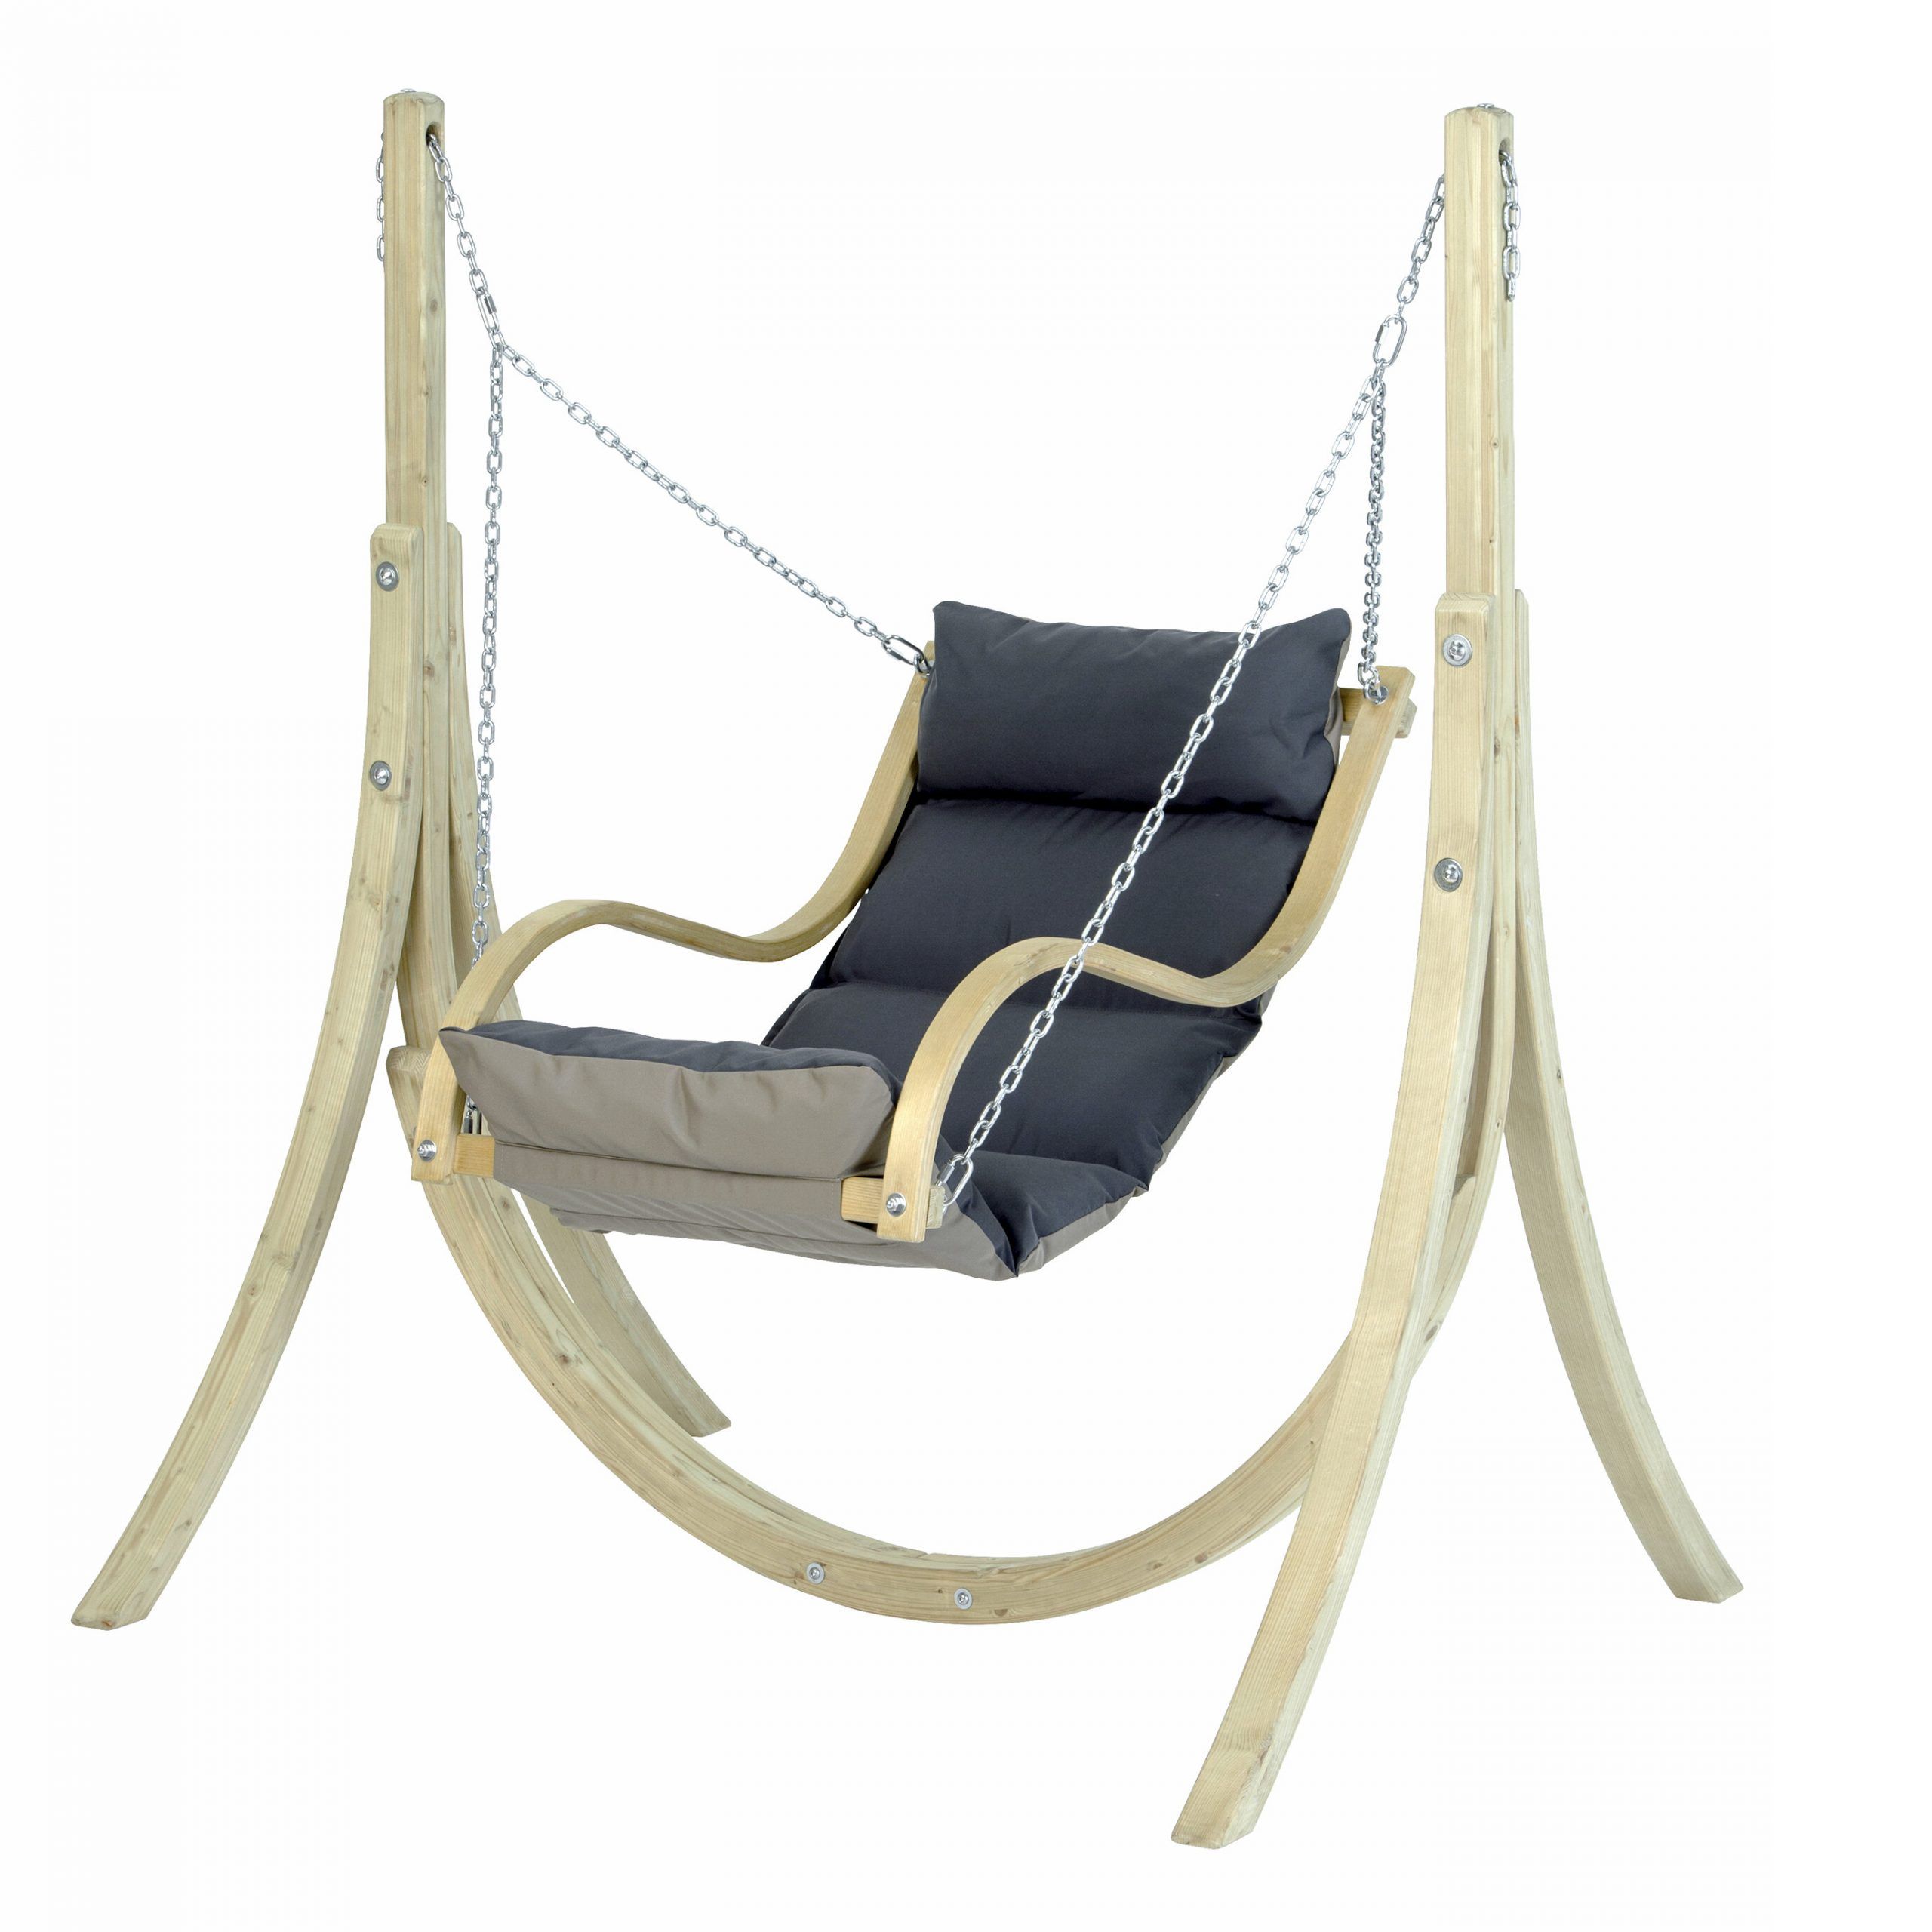 Latest Spurling Porch Swing Within Outdoor Wicker Plastic Half Moon Leaf Shape Porch Swings (View 4 of 25)